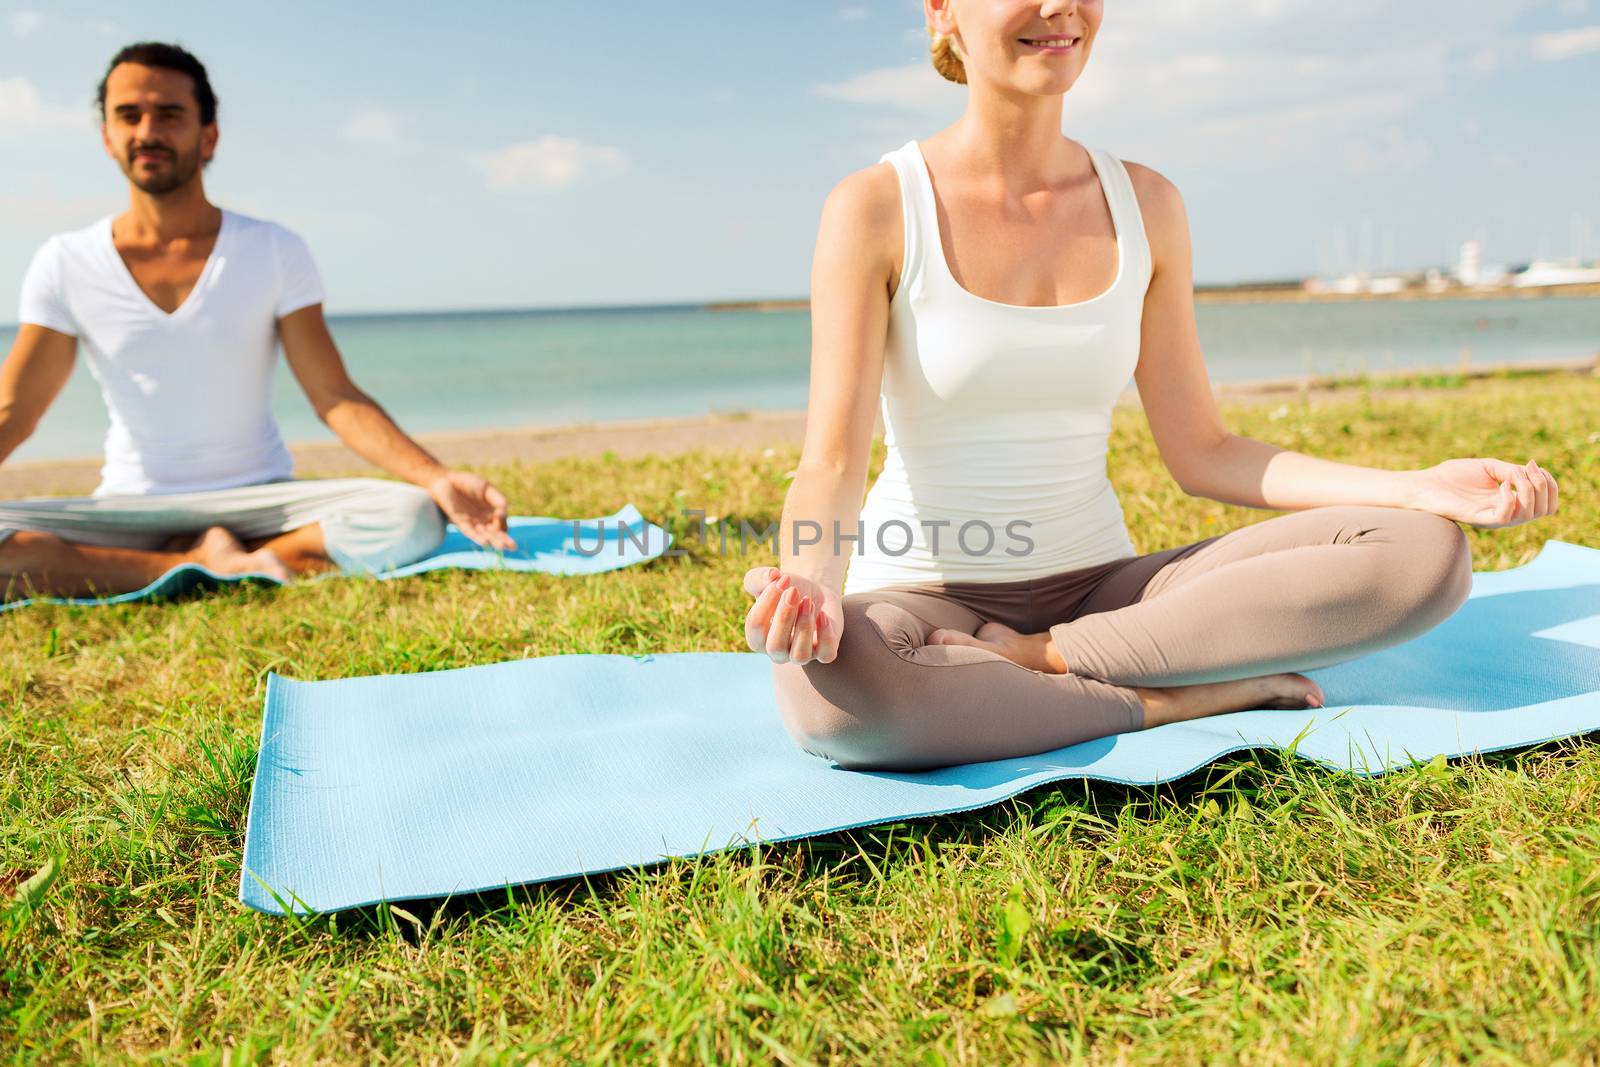 fitness, sport, people and lifestyle concept - close up of smiling couple making yoga exercises sitting on mats outdoors